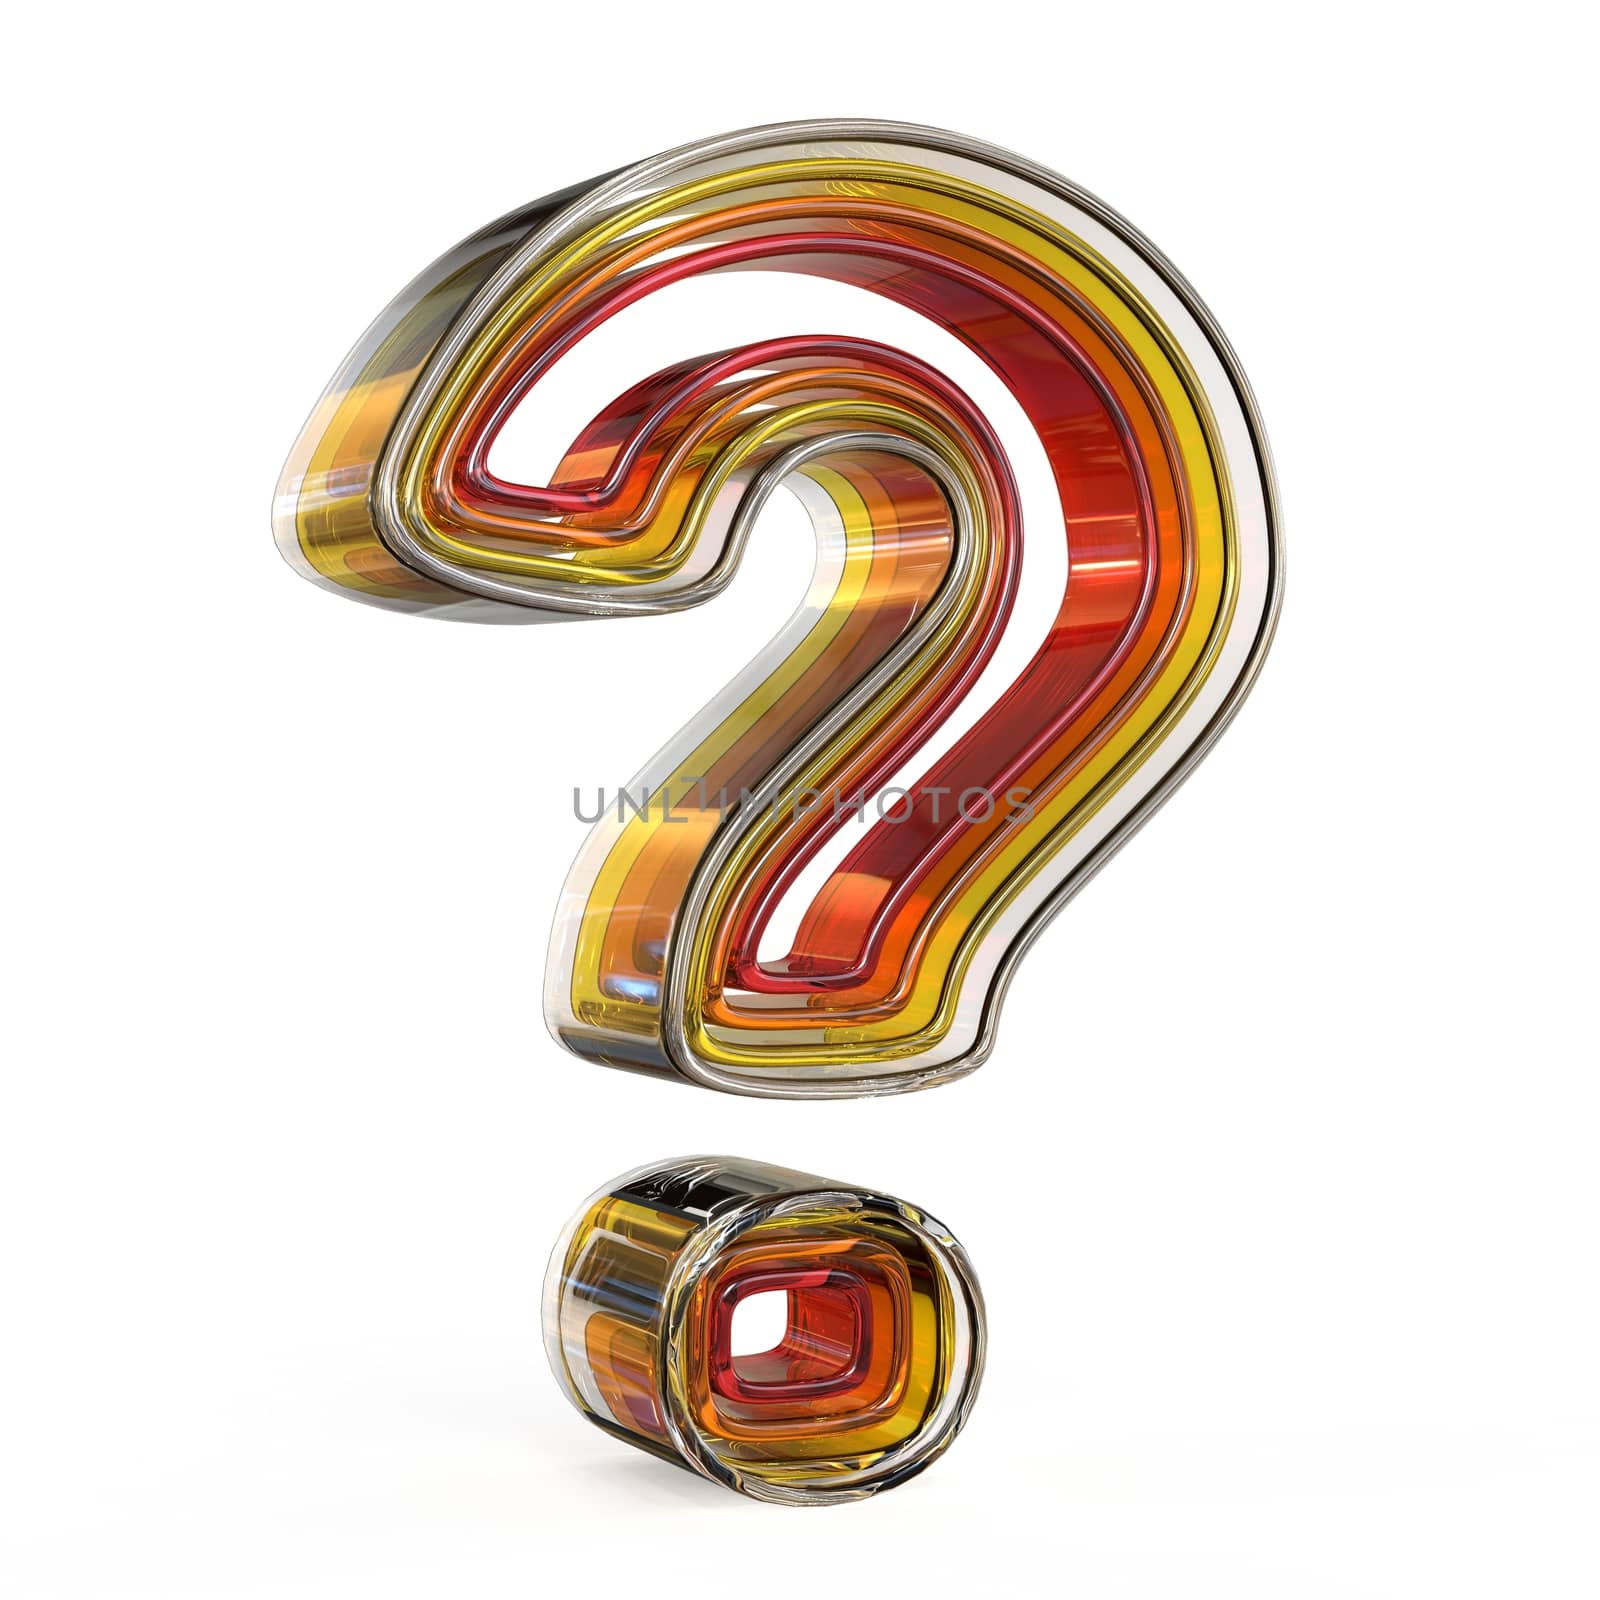 Plastic layered transparent question mark. 3D render illustration isolated on white background